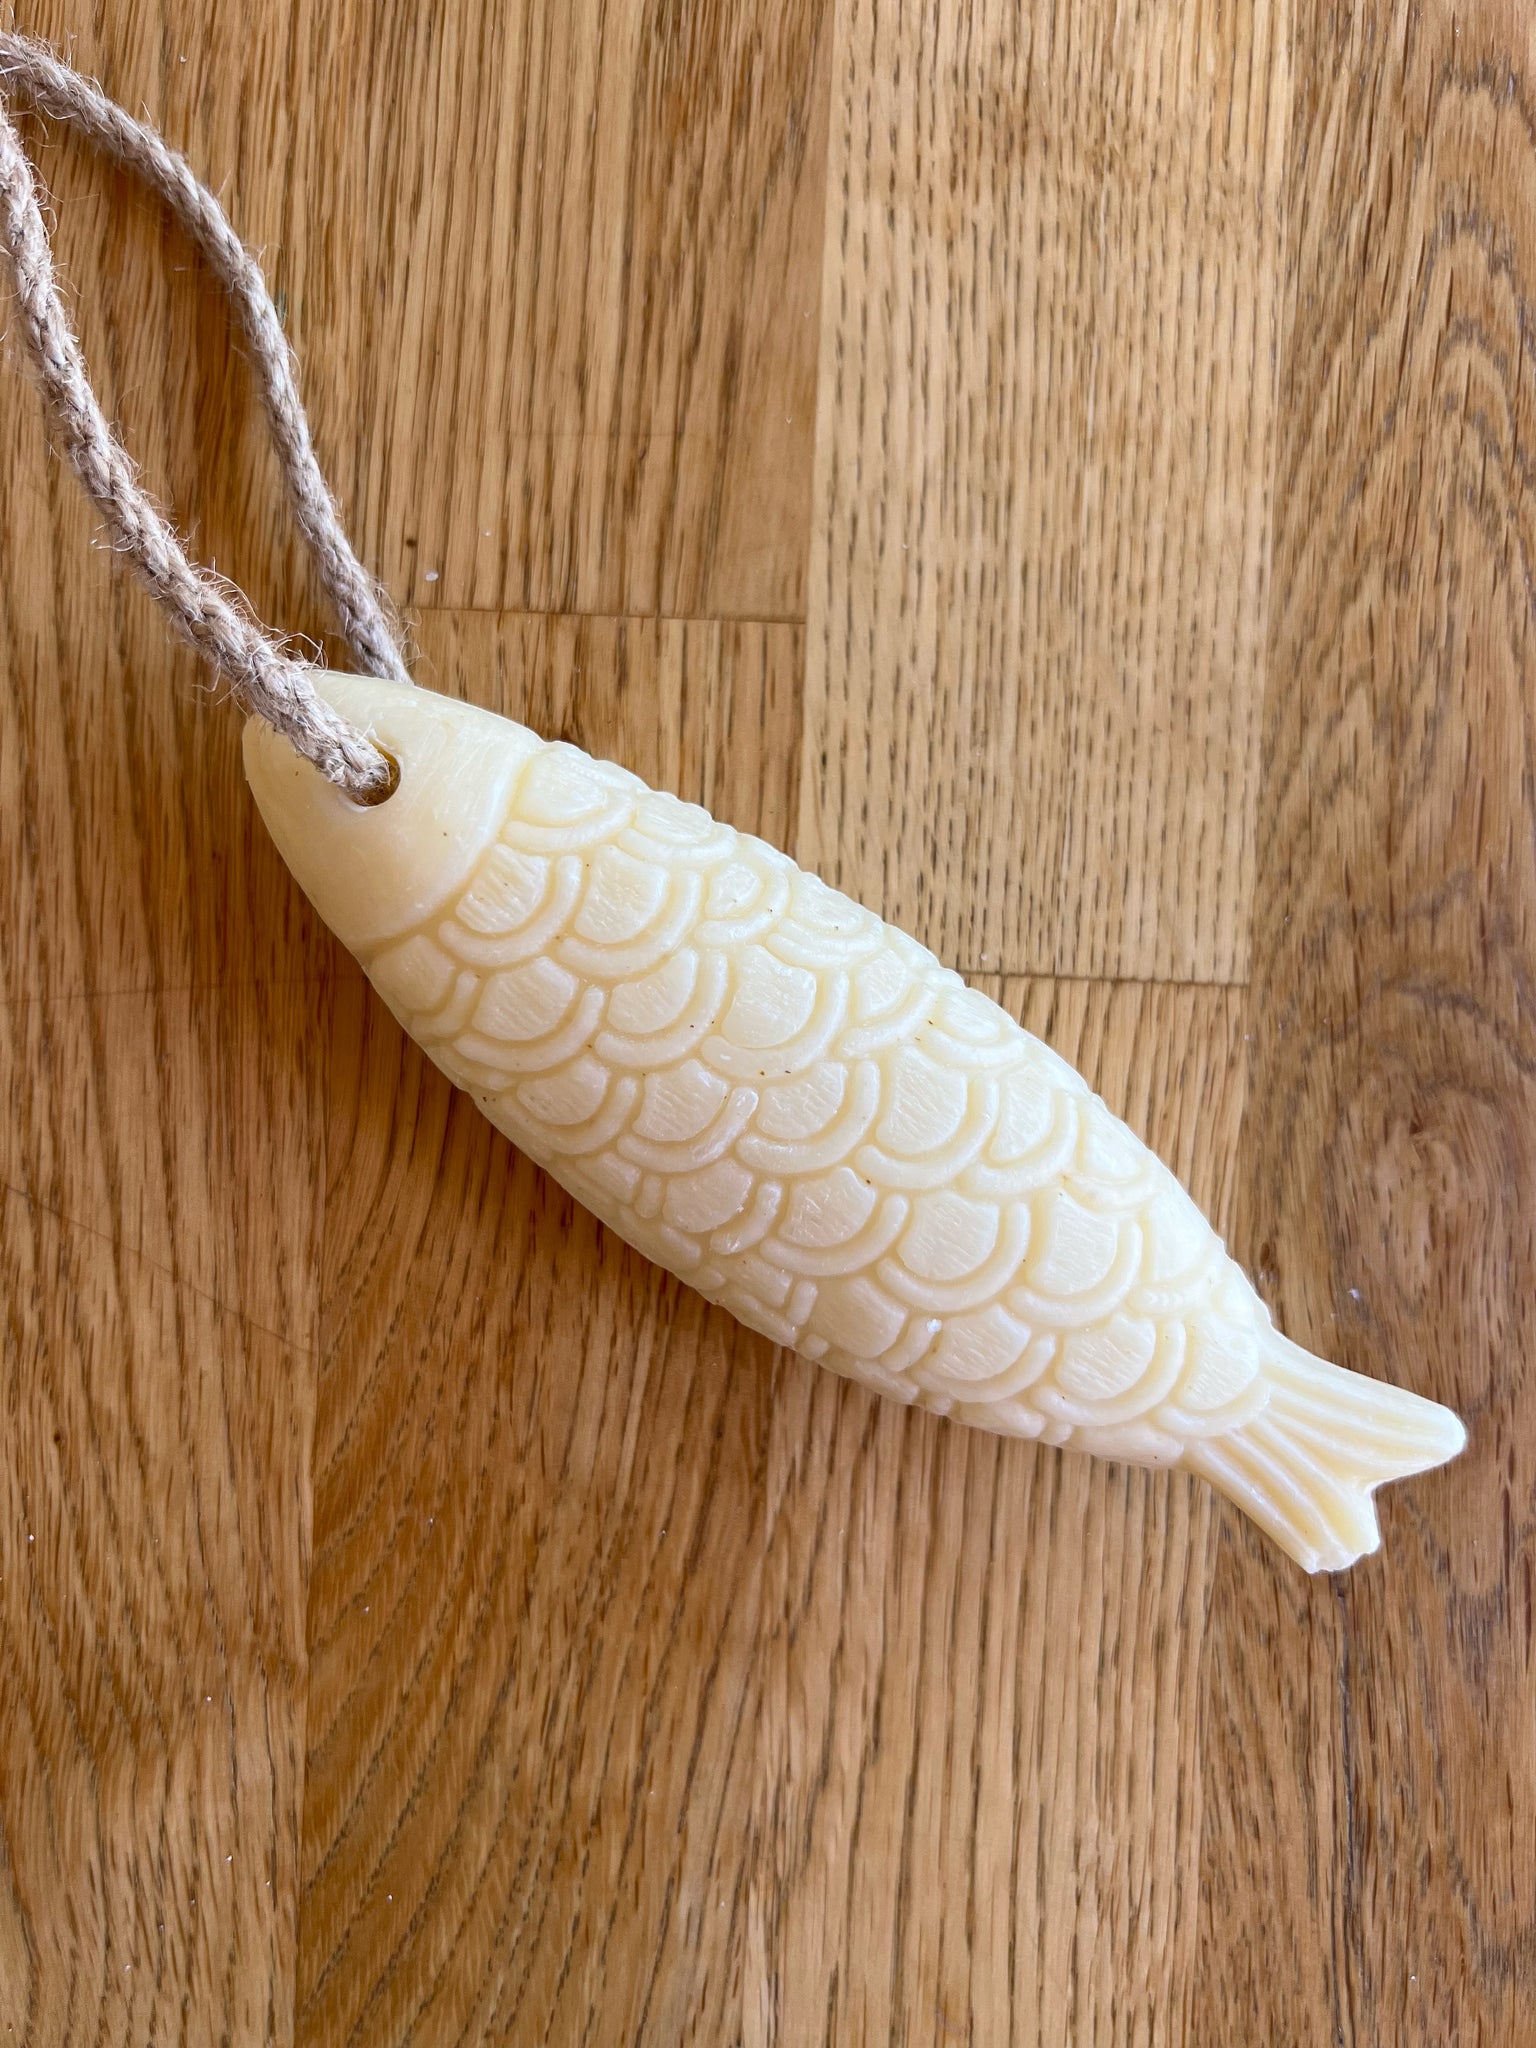 Fish Soap-on-a-Rope